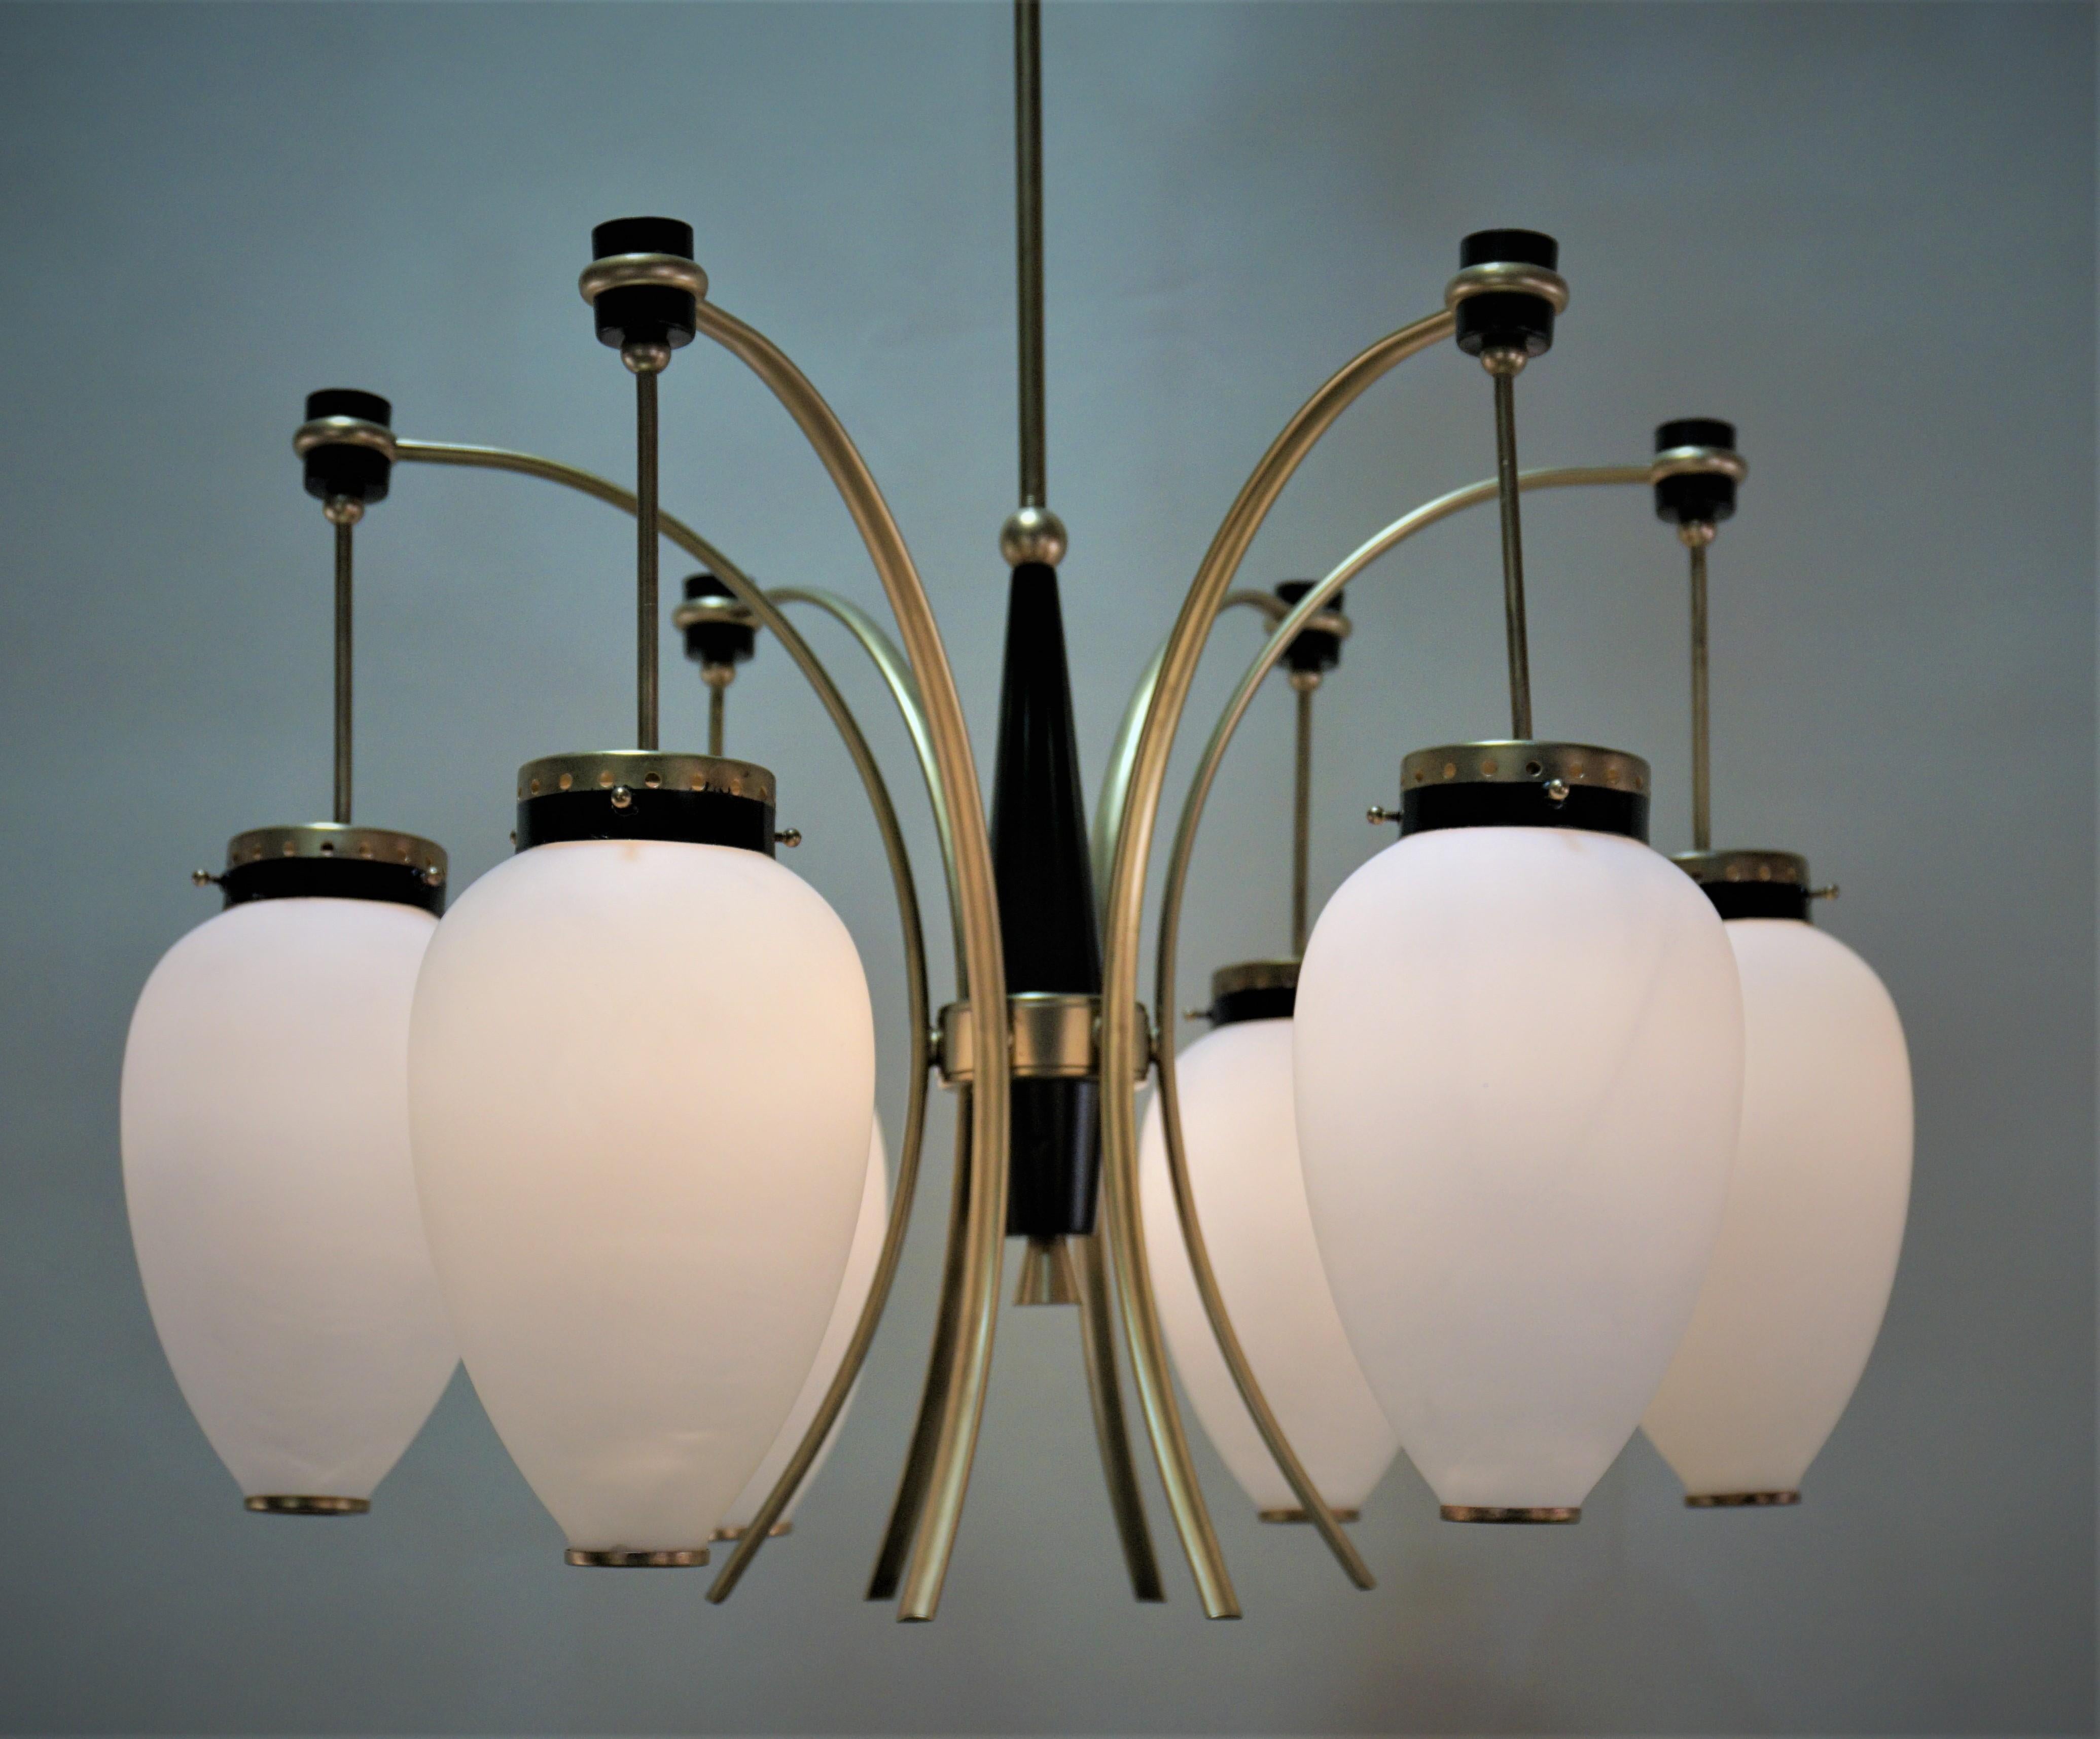 Italian six-light bronze and black lacquer frame with white satin opal glass shades.